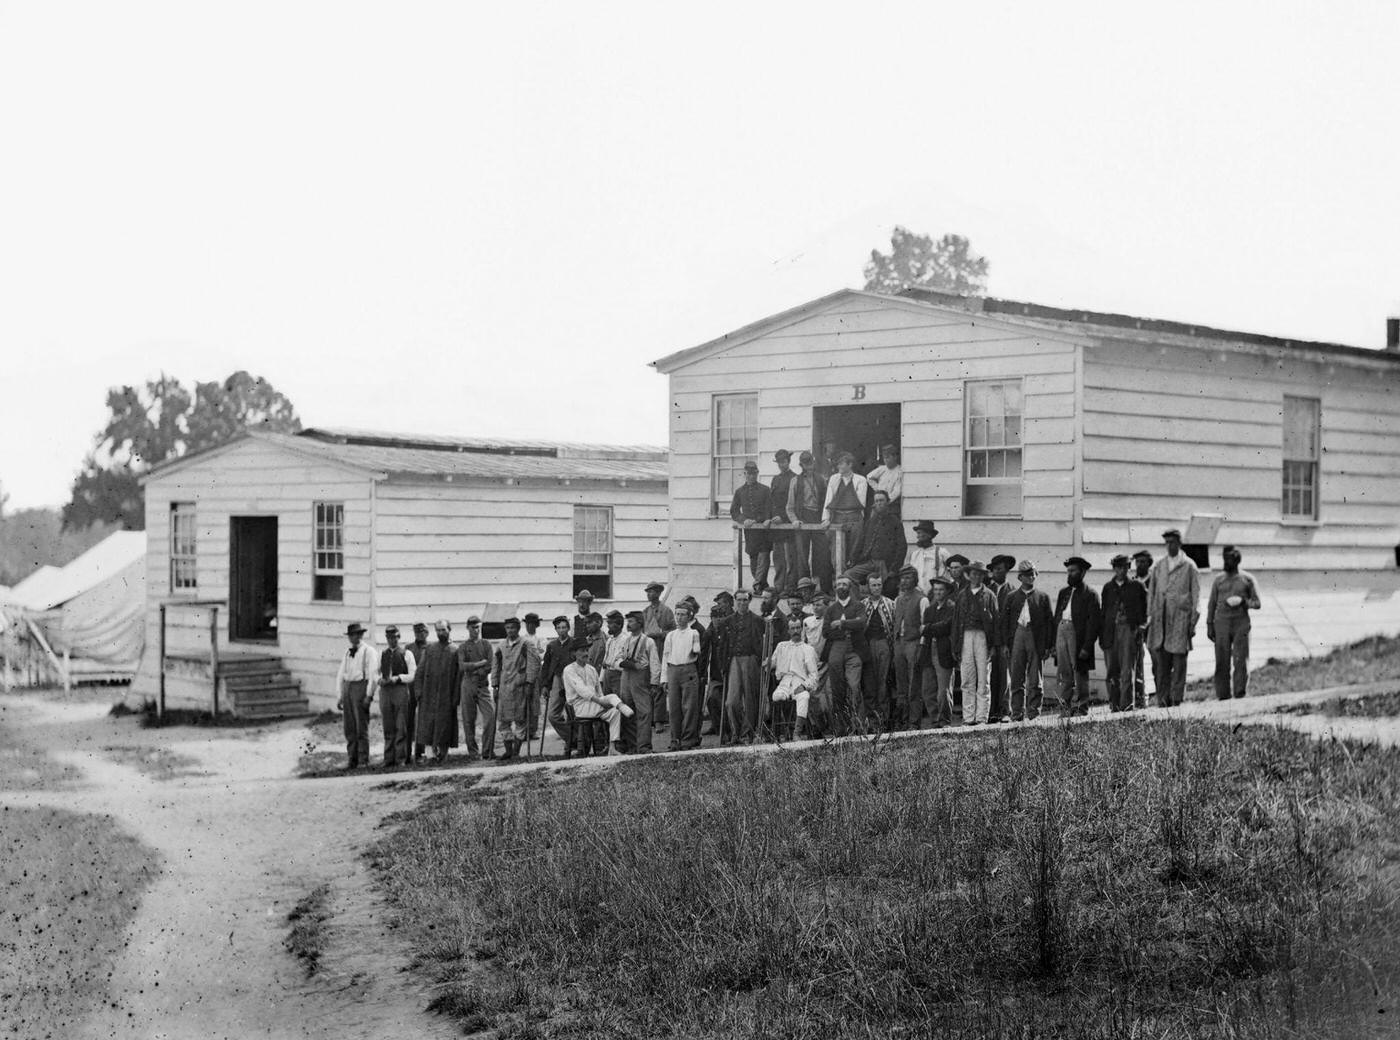 Group of patients in front of ward B of Harewood Hospital, near Wasington, DC, 1863.